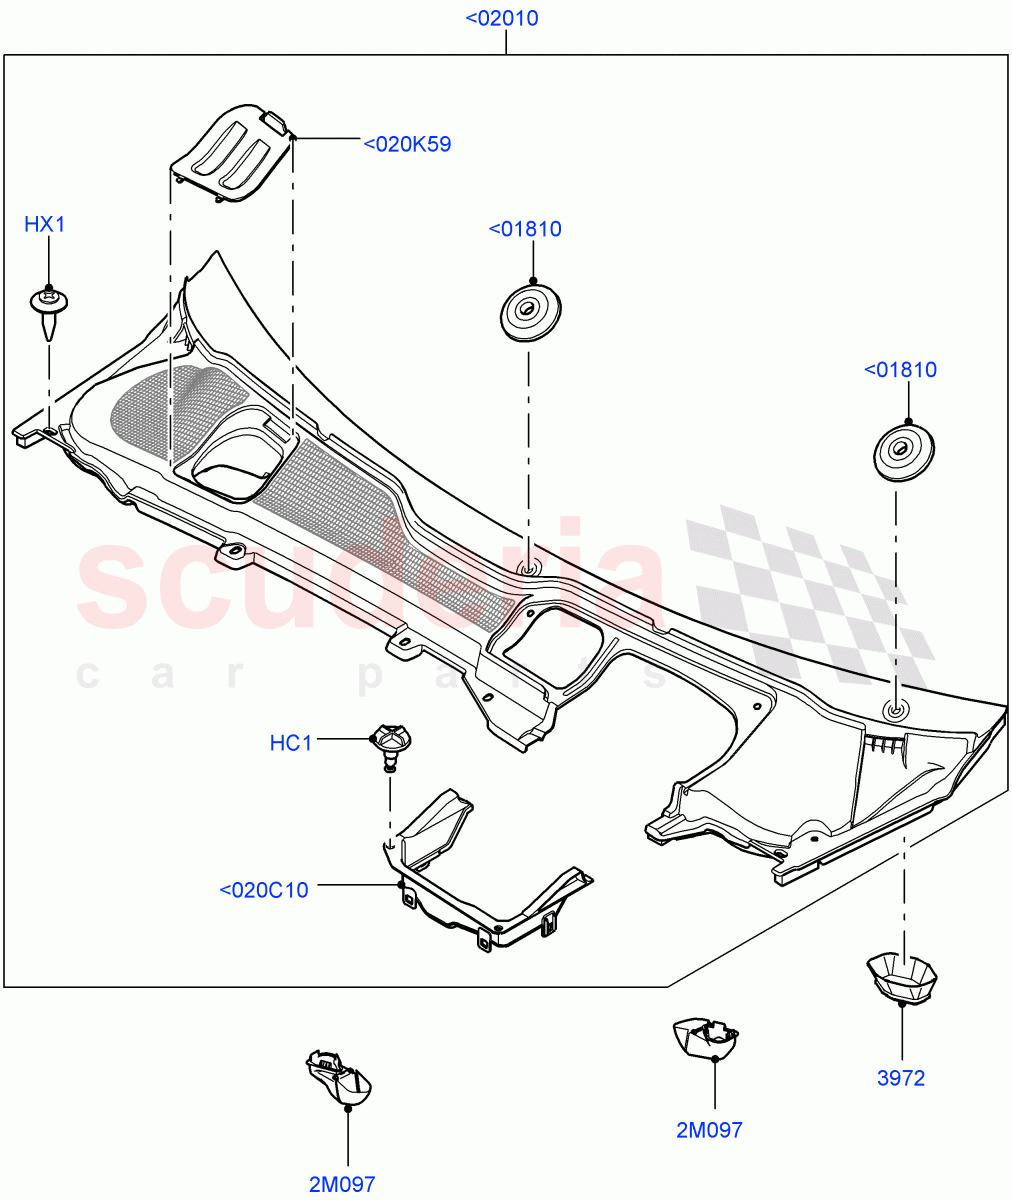 Cowl/Panel And Related Parts(Changsu (China))((V)FROMEG000001) of Land Rover Land Rover Range Rover Evoque (2012-2018) [2.2 Single Turbo Diesel]